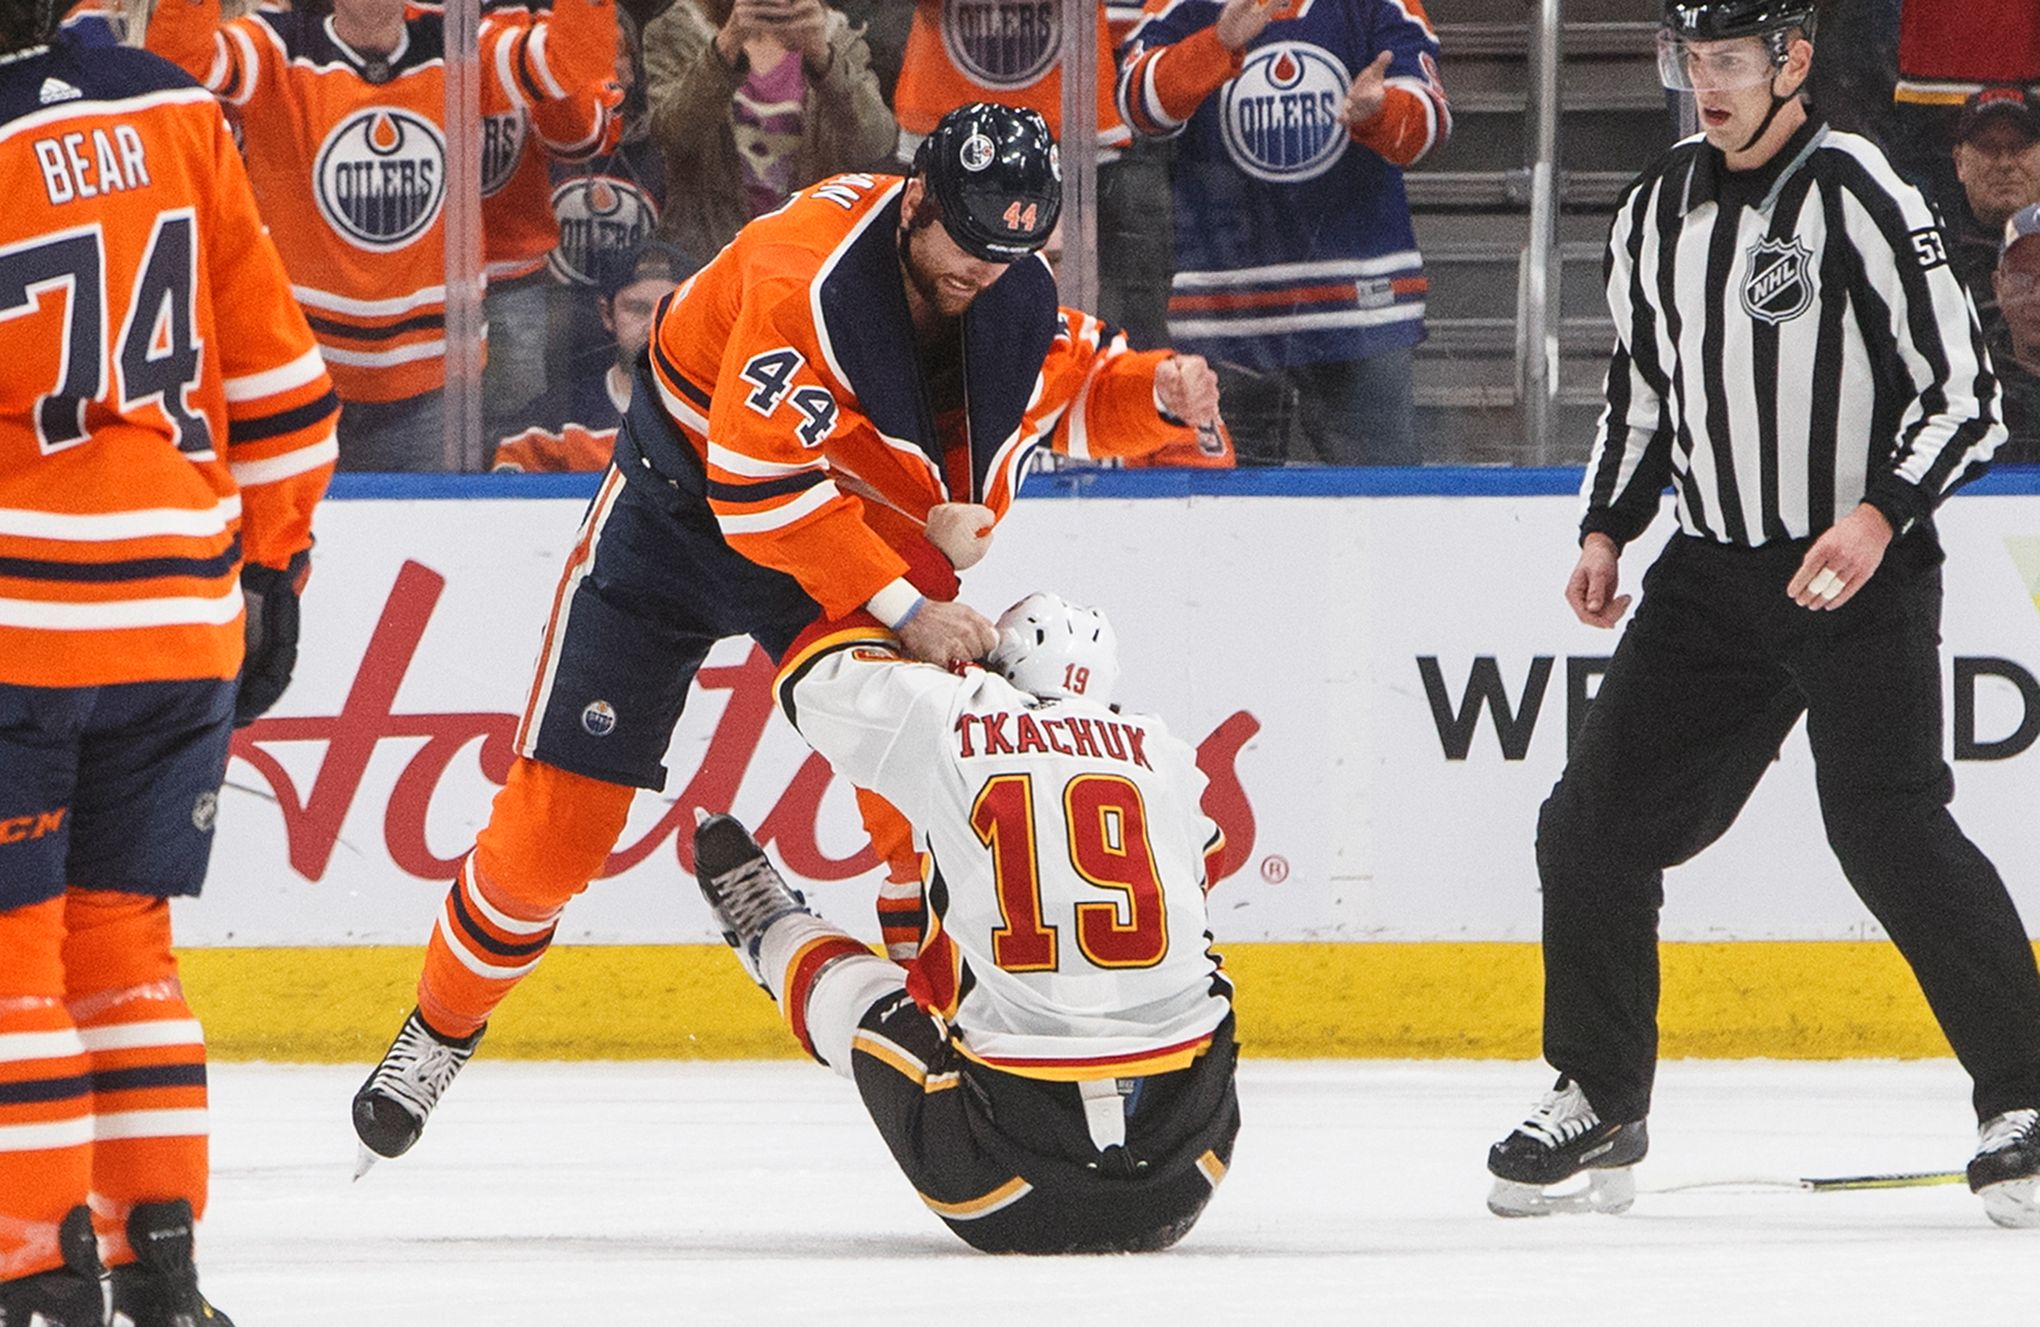 Tkachuk: Fighting Kassian was a way to 'stick up for myself